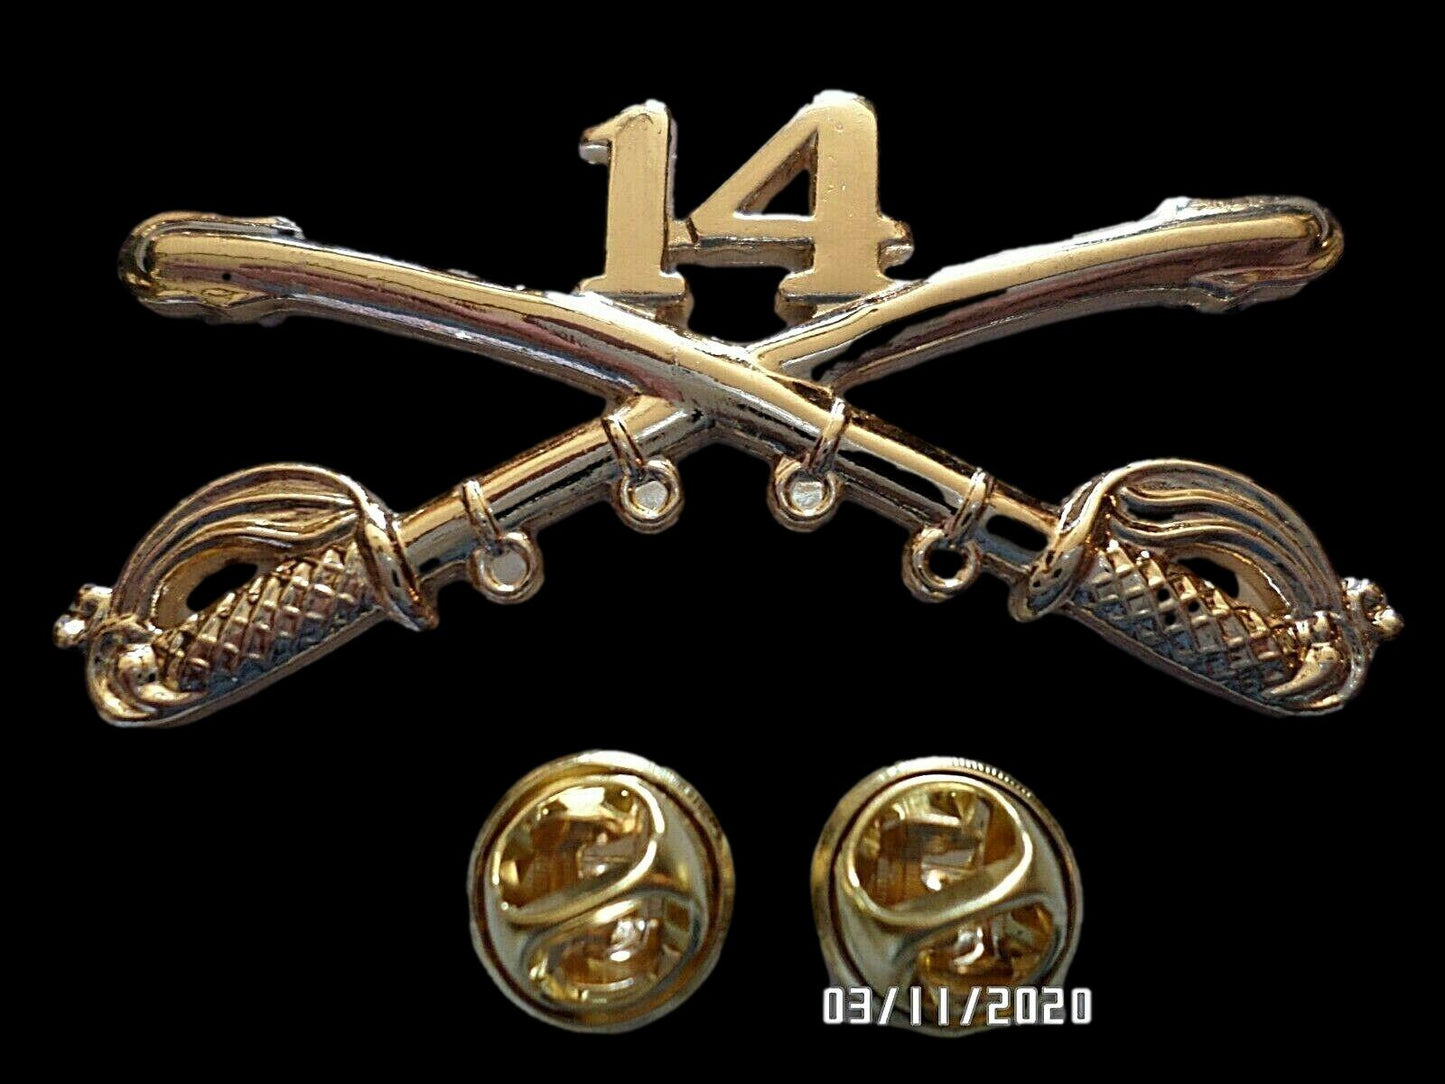 14th CAVALRY SWORDS SABERS MILITARY HAT PIN 14th CAVALRY REGIMENT BADGE U.S ARMY